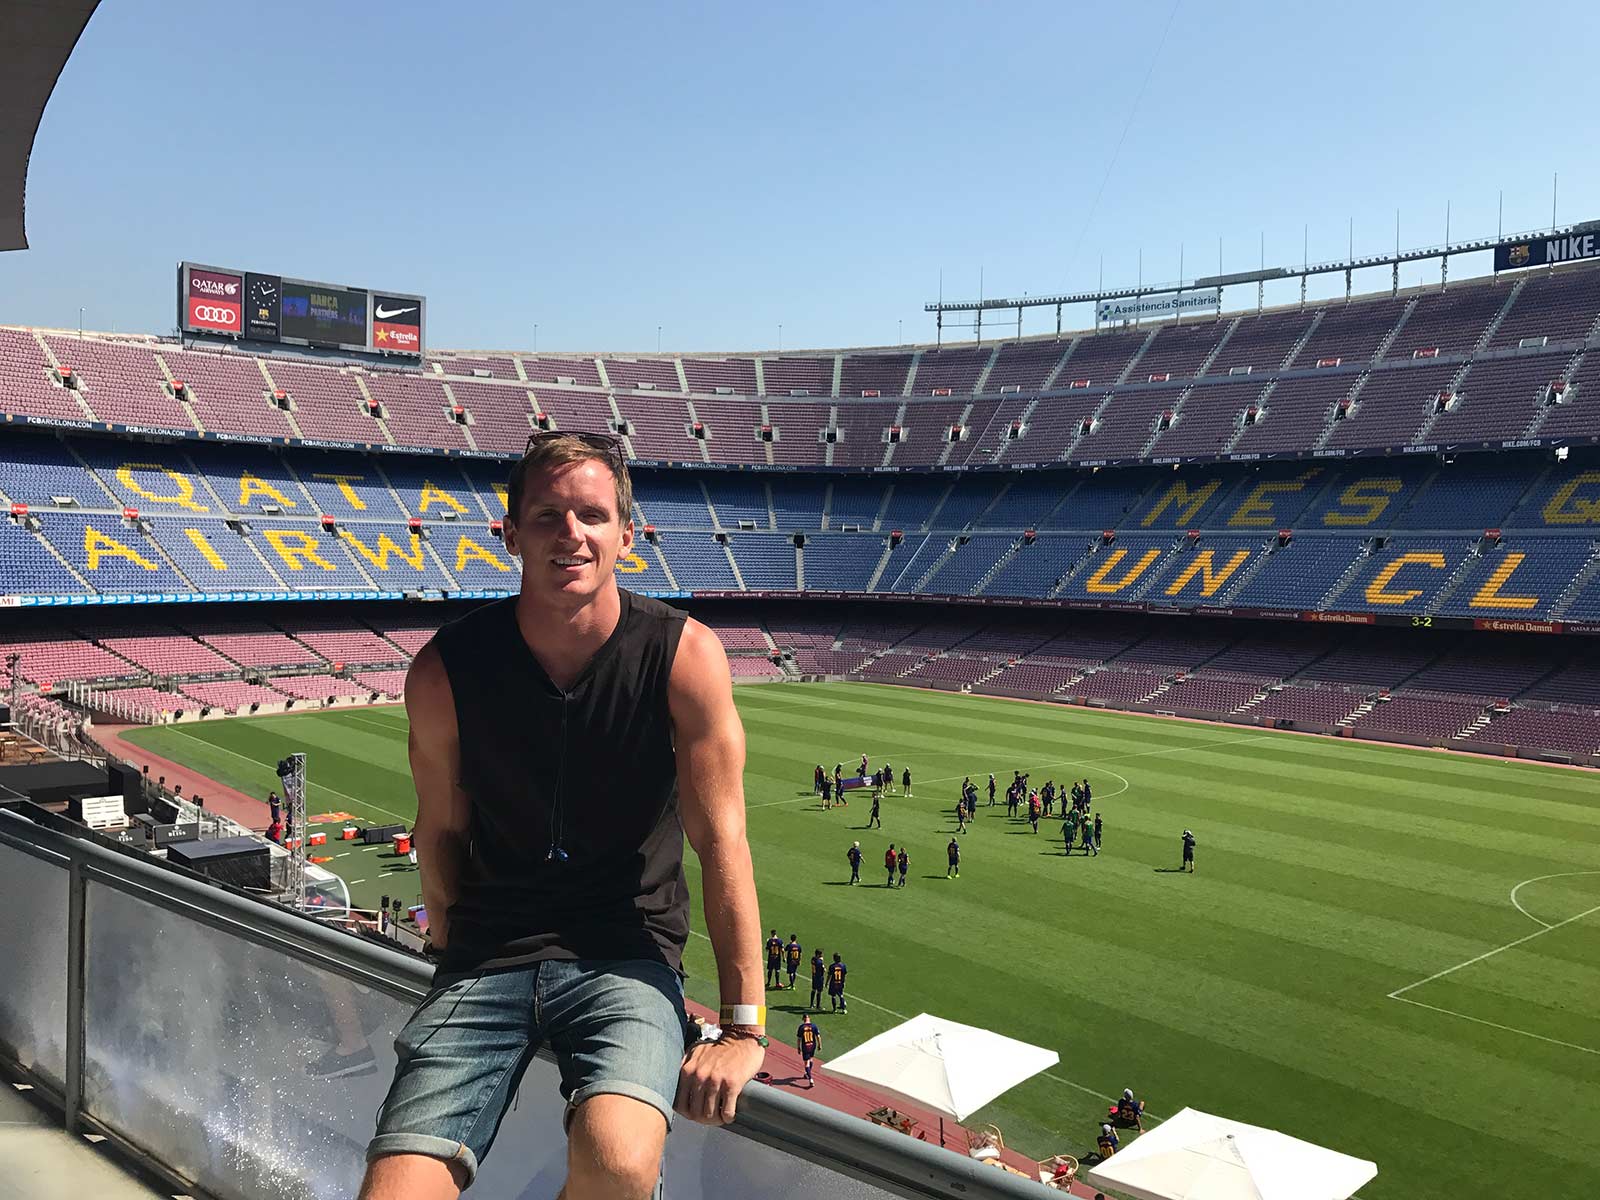 David Simpson at FC Barcelona Camp Nou in Barcelona. 10 things you must do in Barcelona